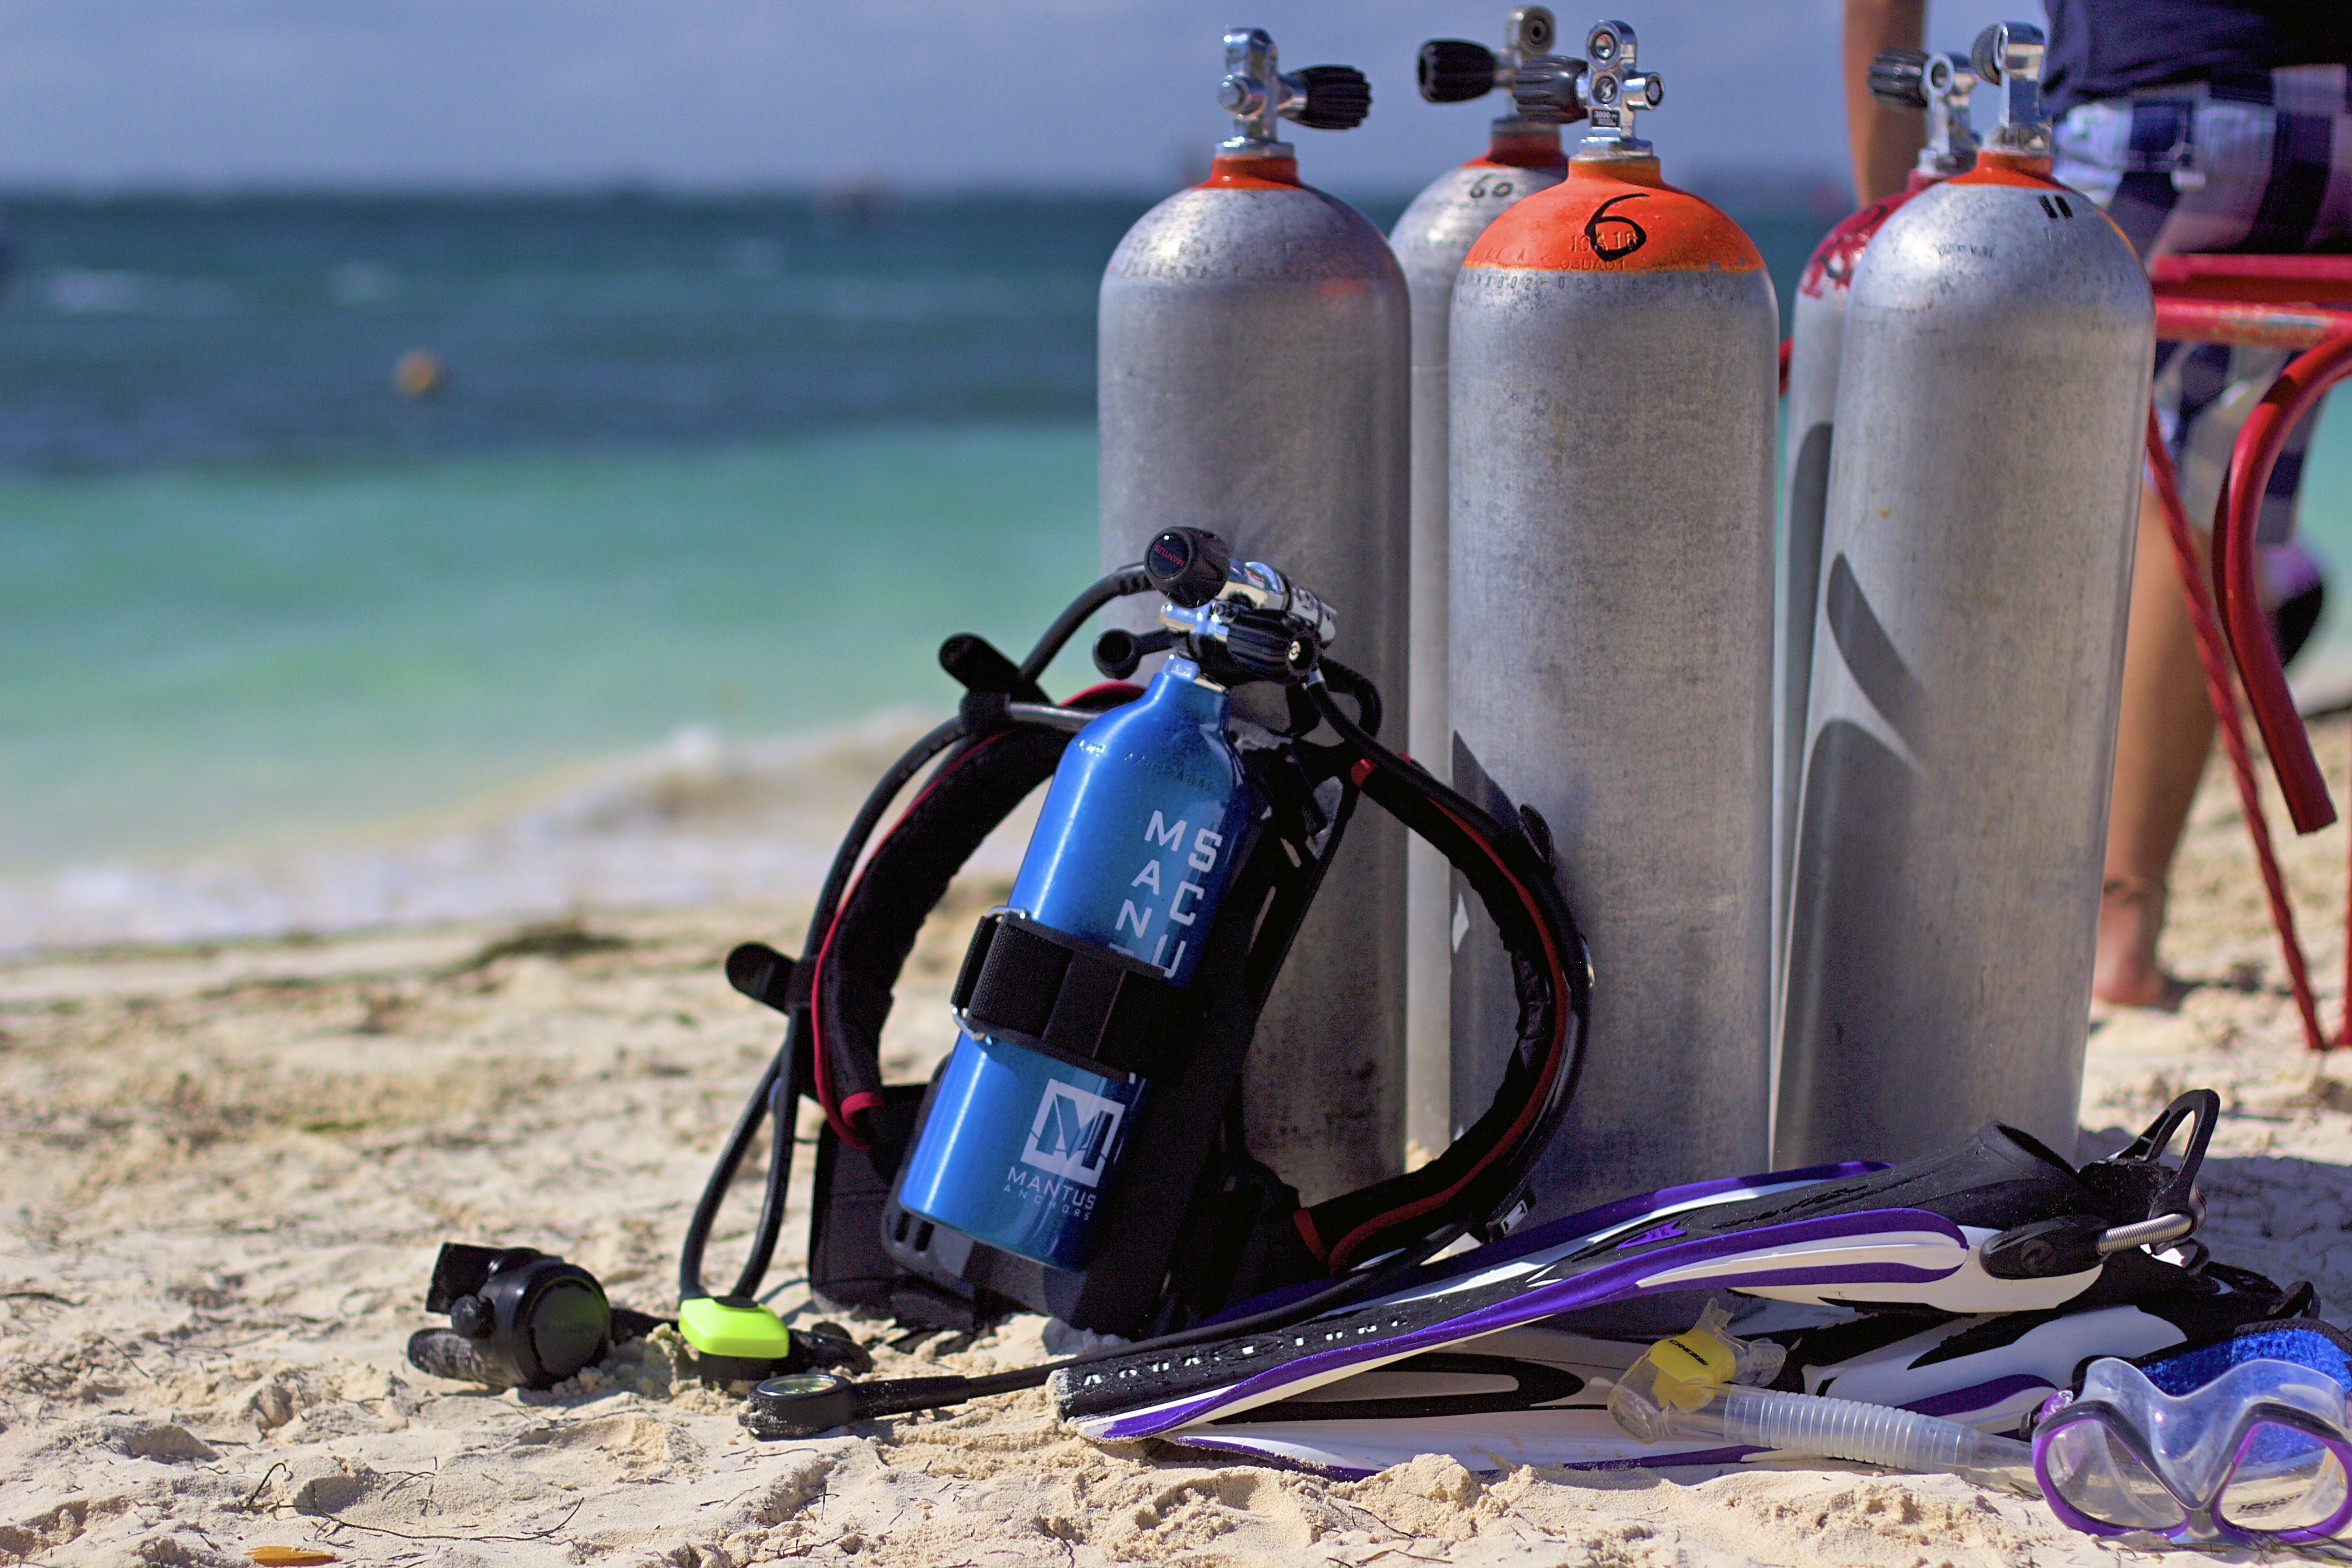 Diving gear with oxygen tanks on the sand by the ocean